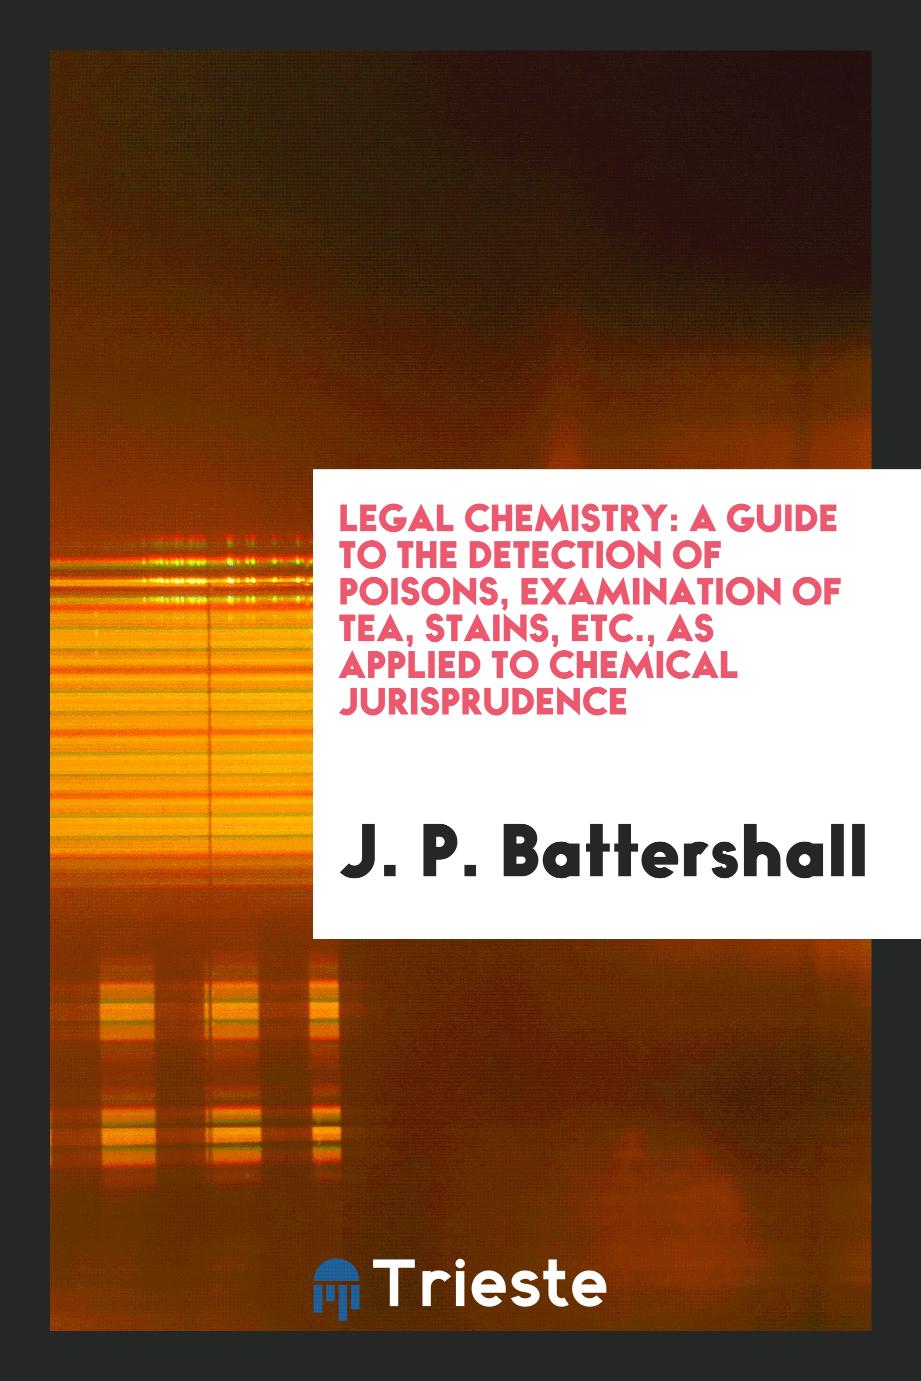 Legal chemistry: a guide to the detection of poisons, examination of tea, stains, etc., as applied to chemical jurisprudence